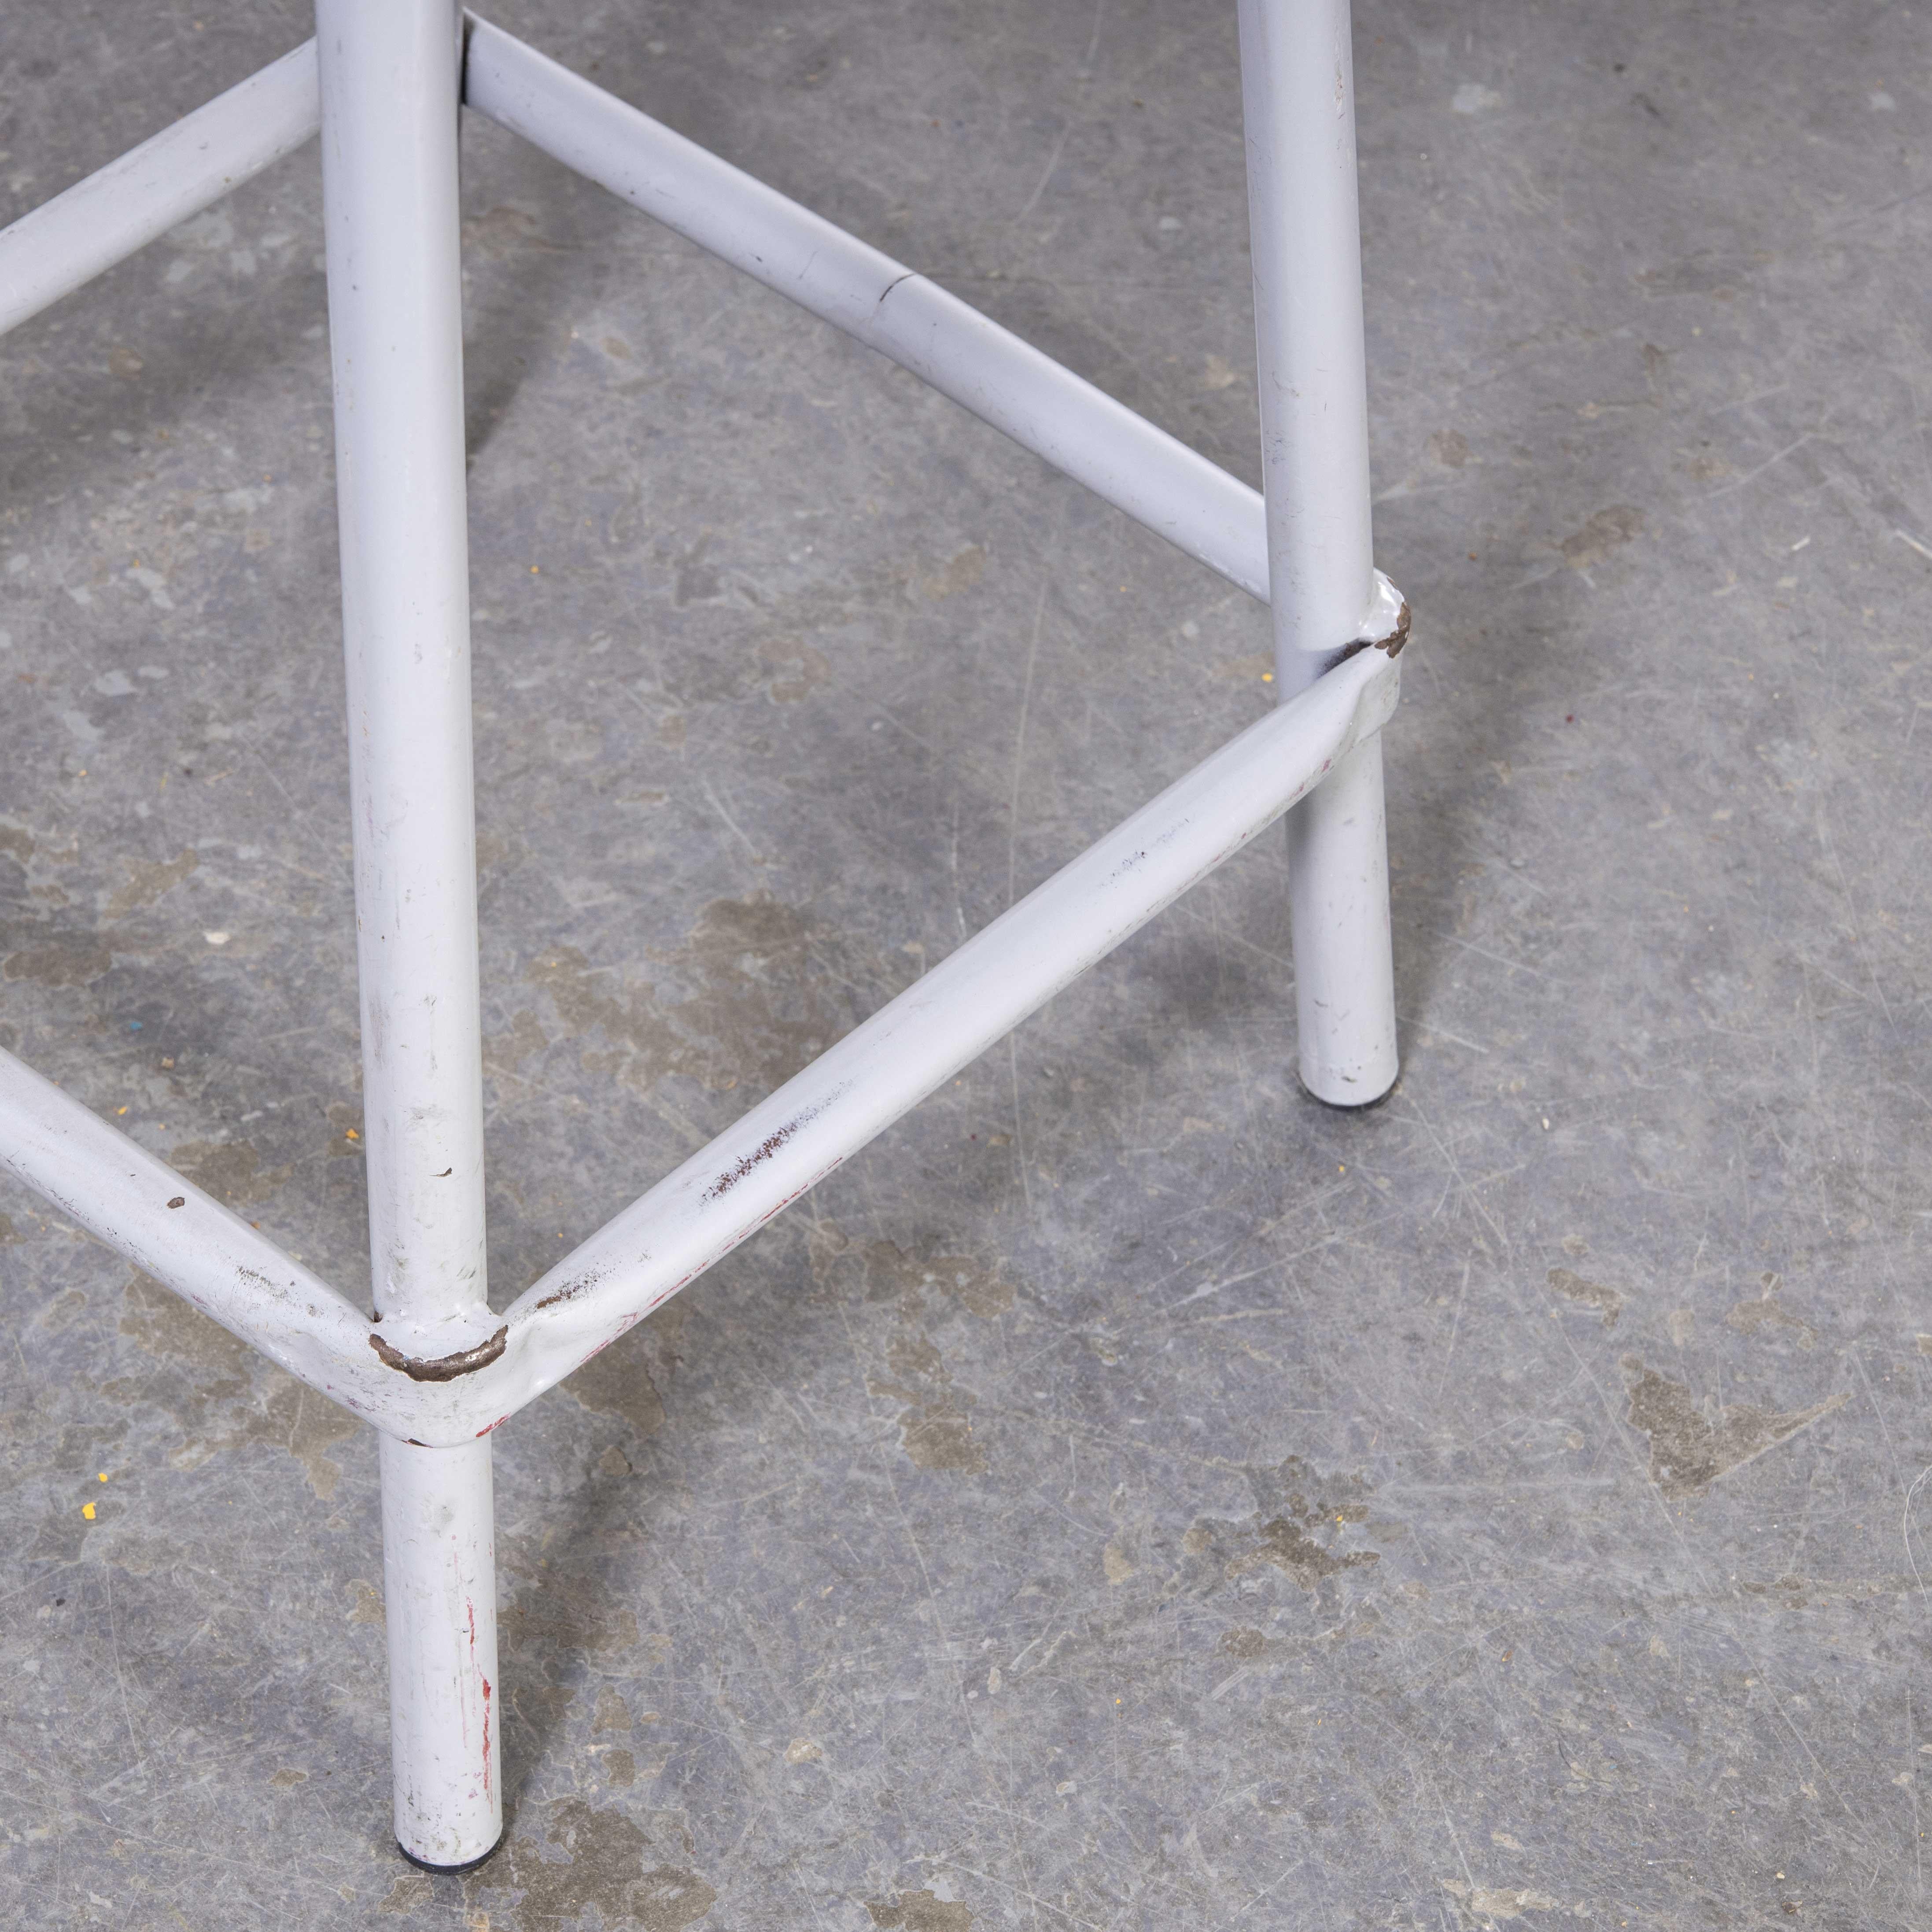 1960’s Mullca French High Stool – Lime square frame
1960’s Mullca French High Stool – Lime square frame. One of our most favourite stools, the laboratory high stools made by Mullca, with the square seat and square footrest. In 1947 Robert Muller